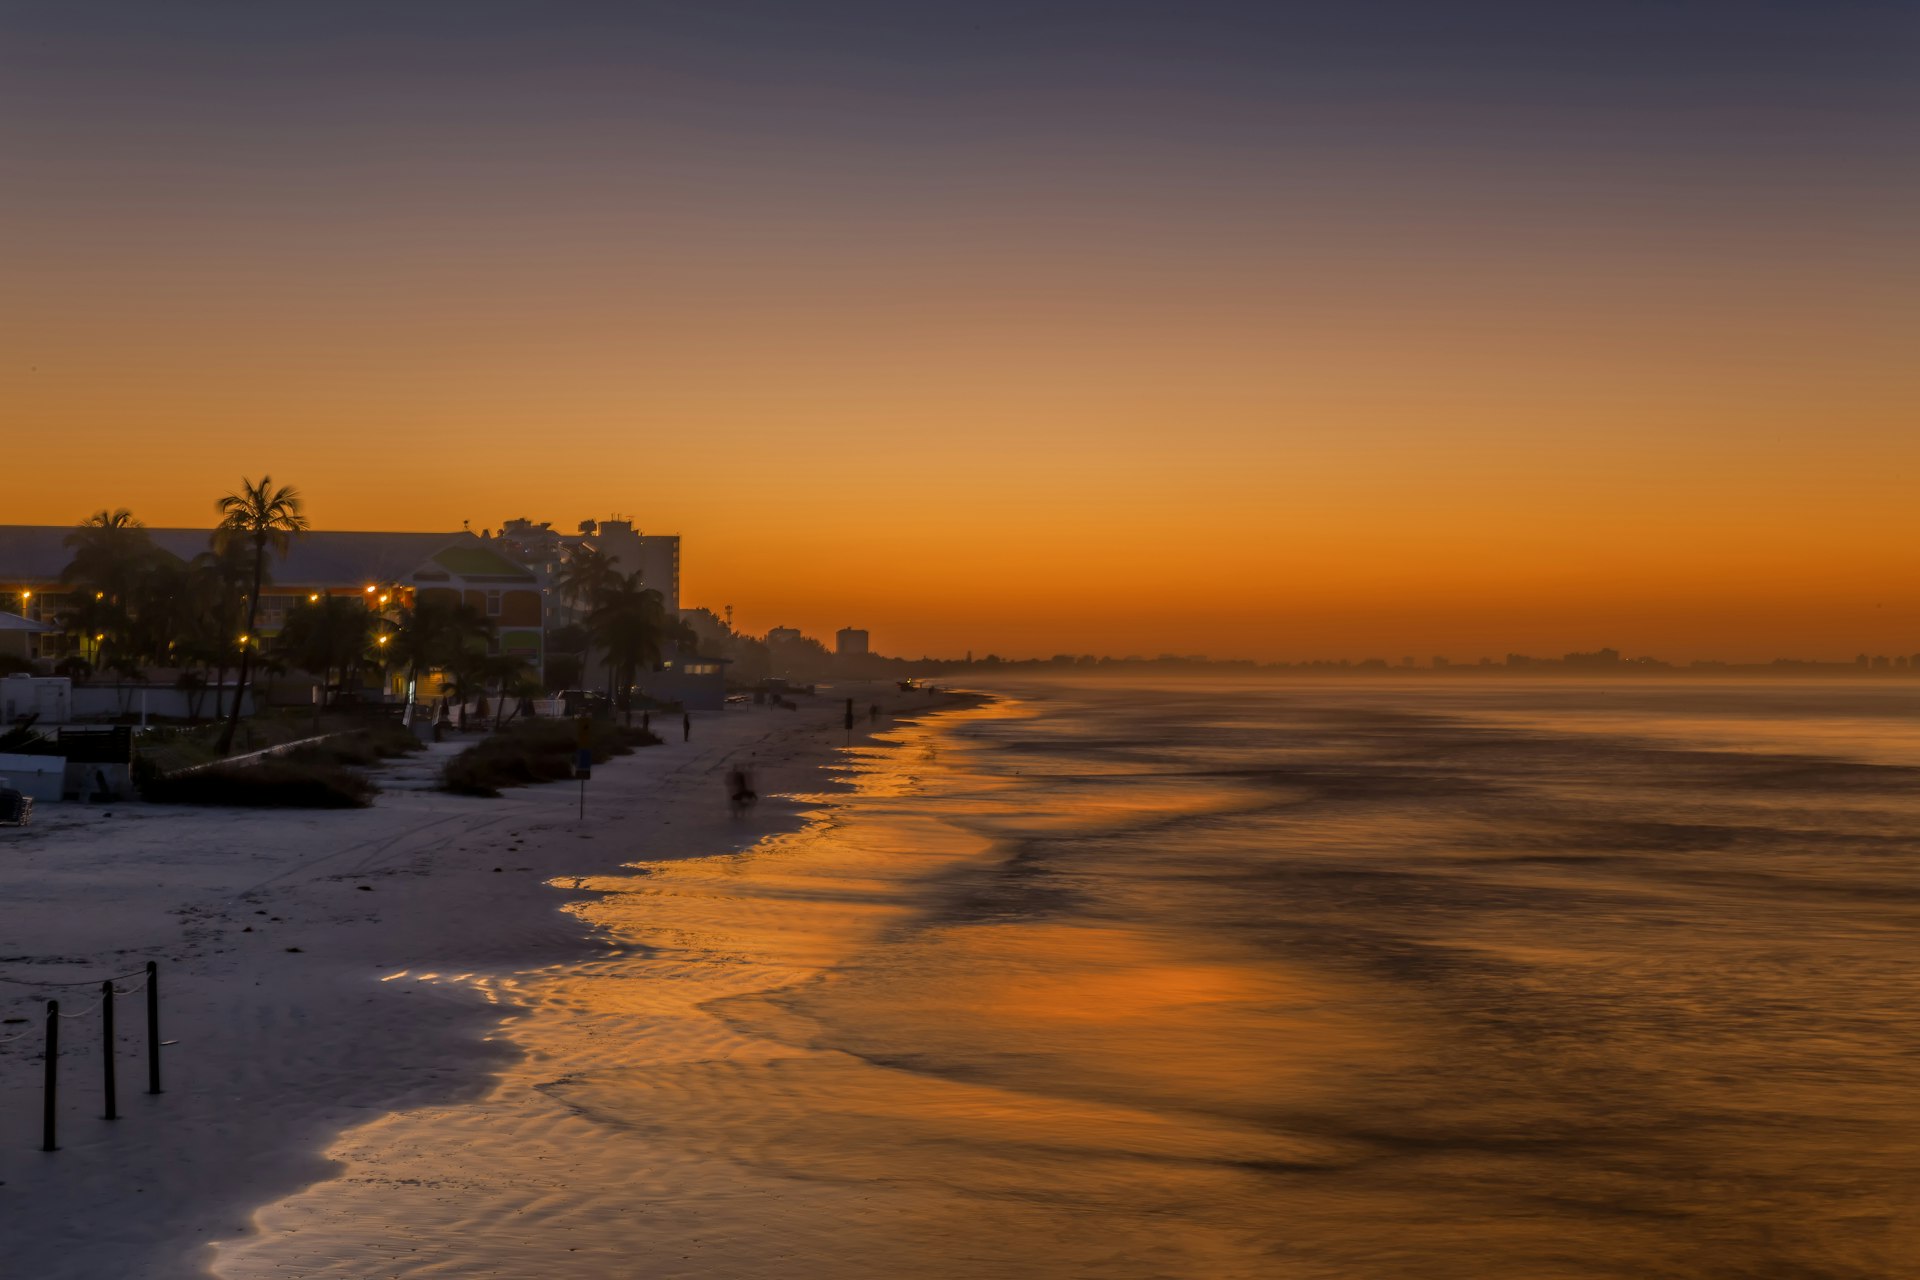 Sunset on Fort Myers Beach. Photo by KevinDerrick / Getty.